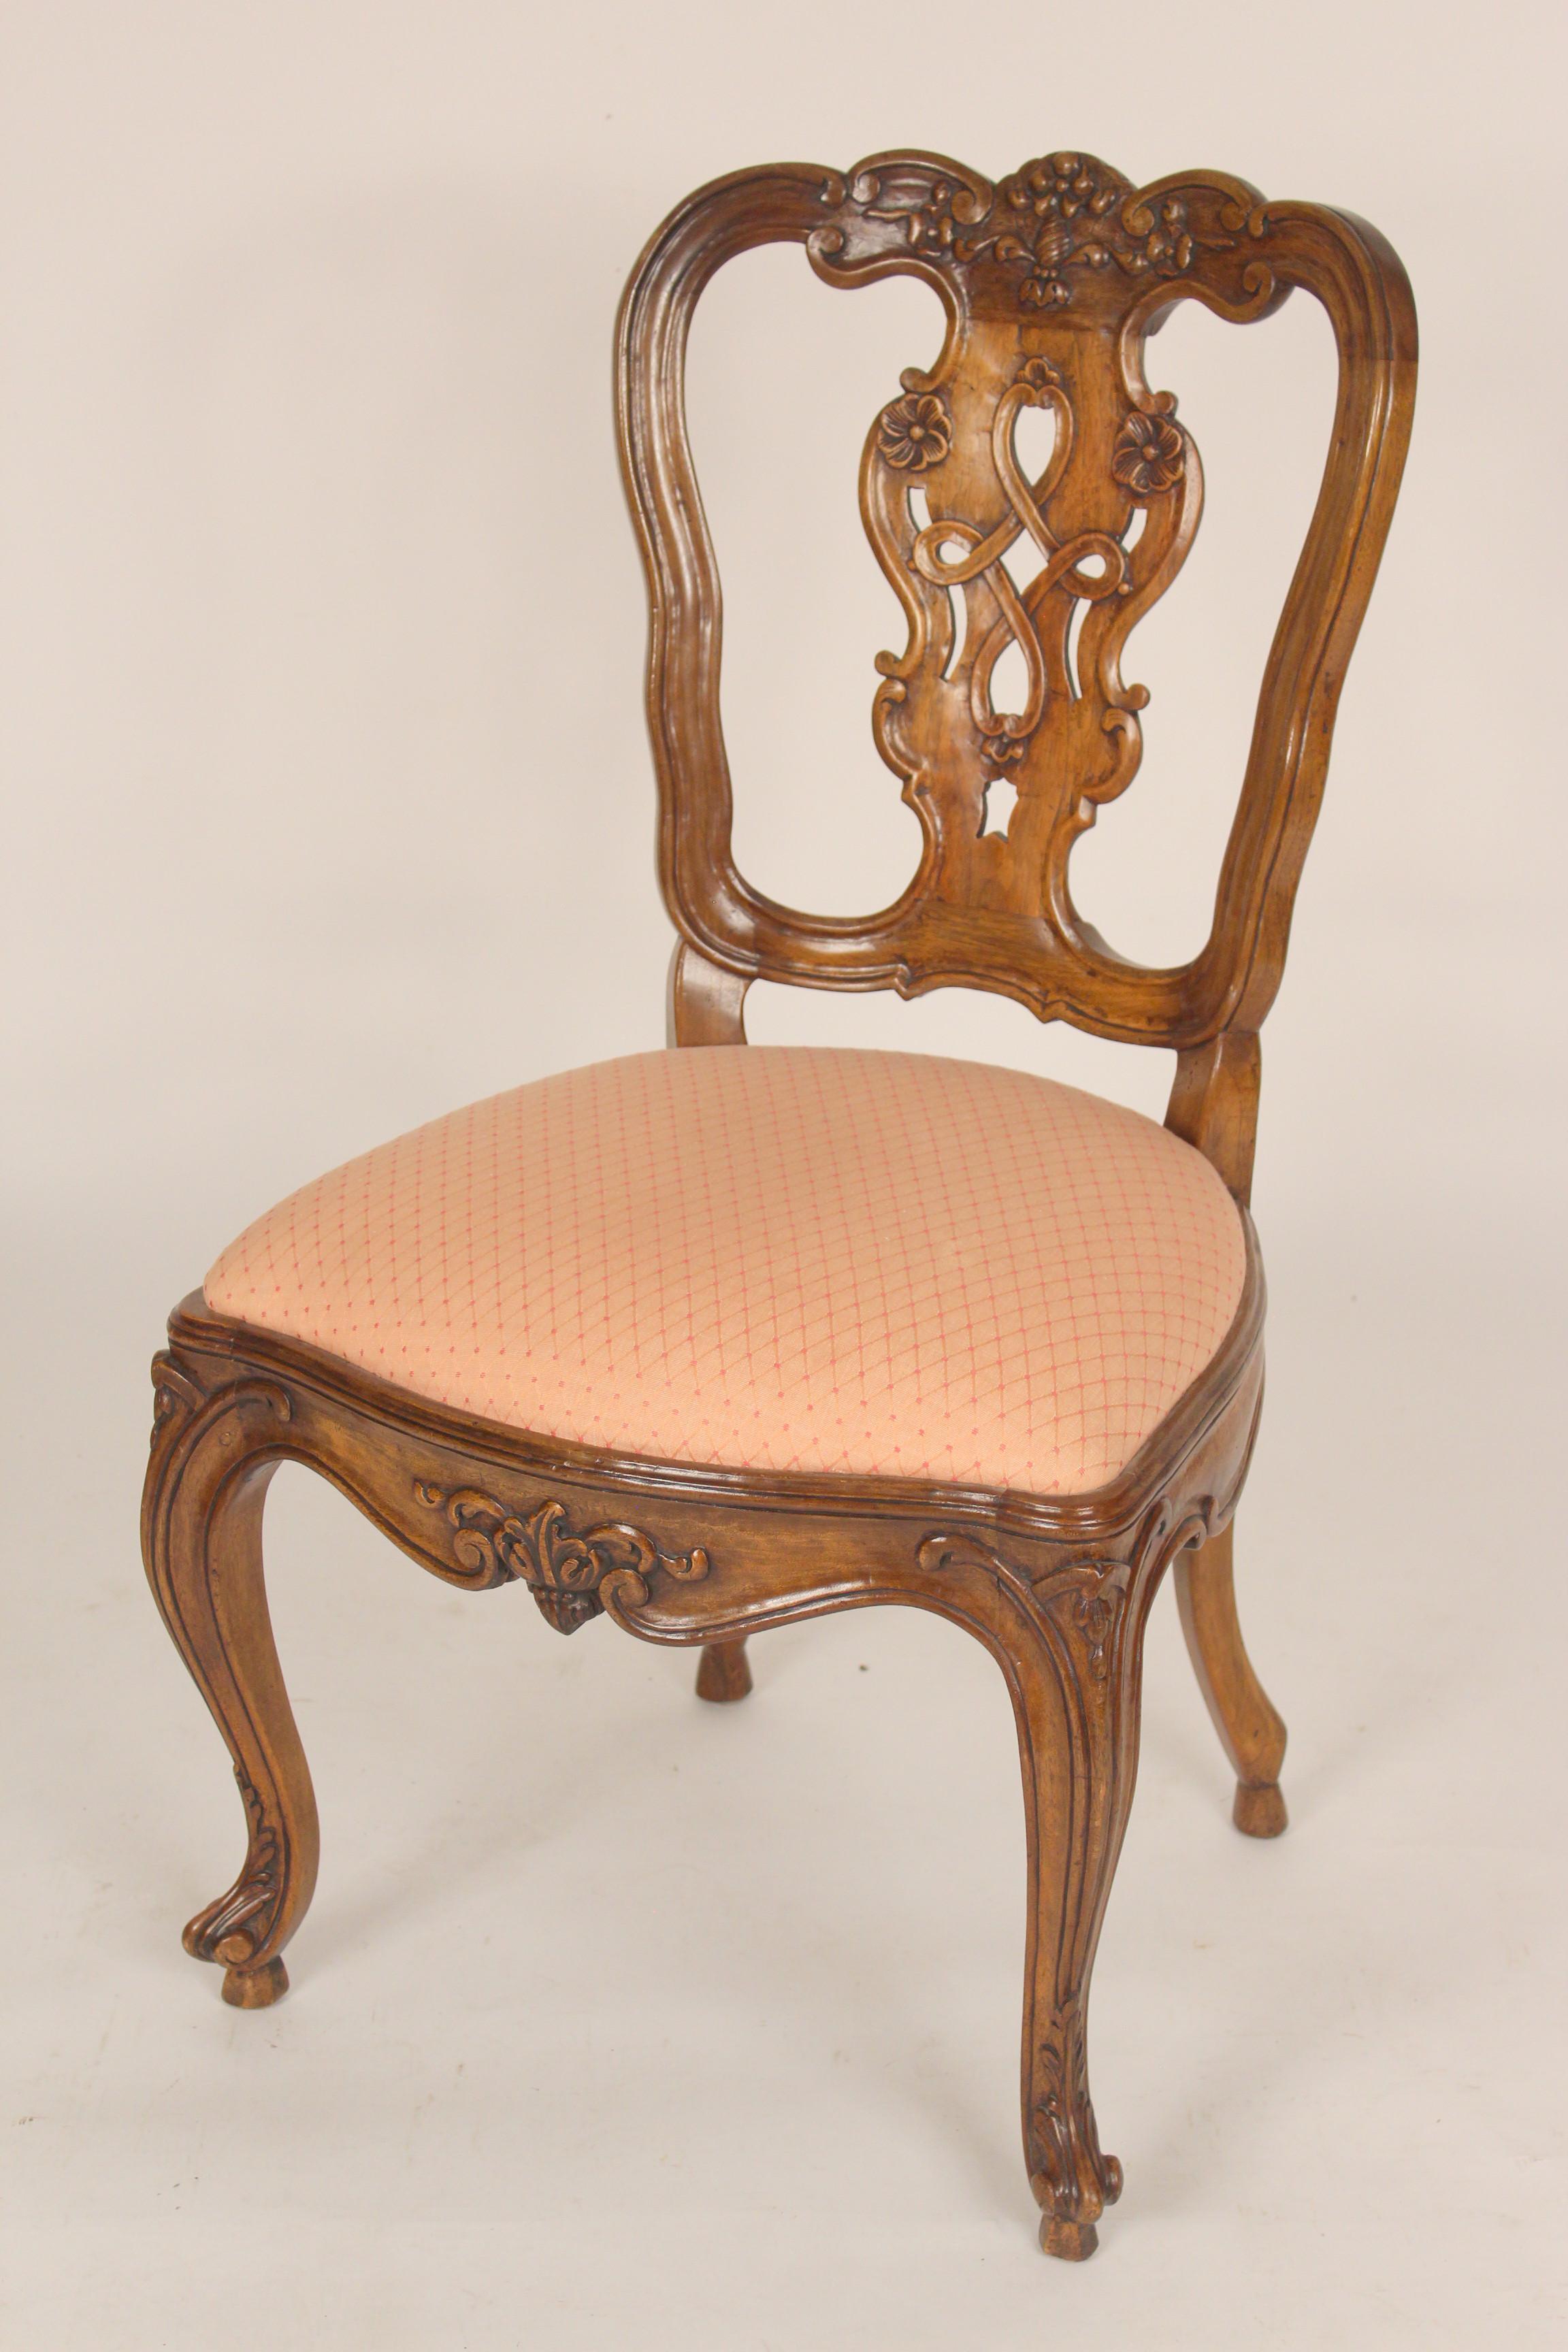 Set of 8 antique Louis XV provincial style walnut and beech wood dining room chairs, 19th century. With floral carved crest rails, back splats, apron and cabriole legs. Chairs have an excellent old patina. Mortise, tenon and peg construction.